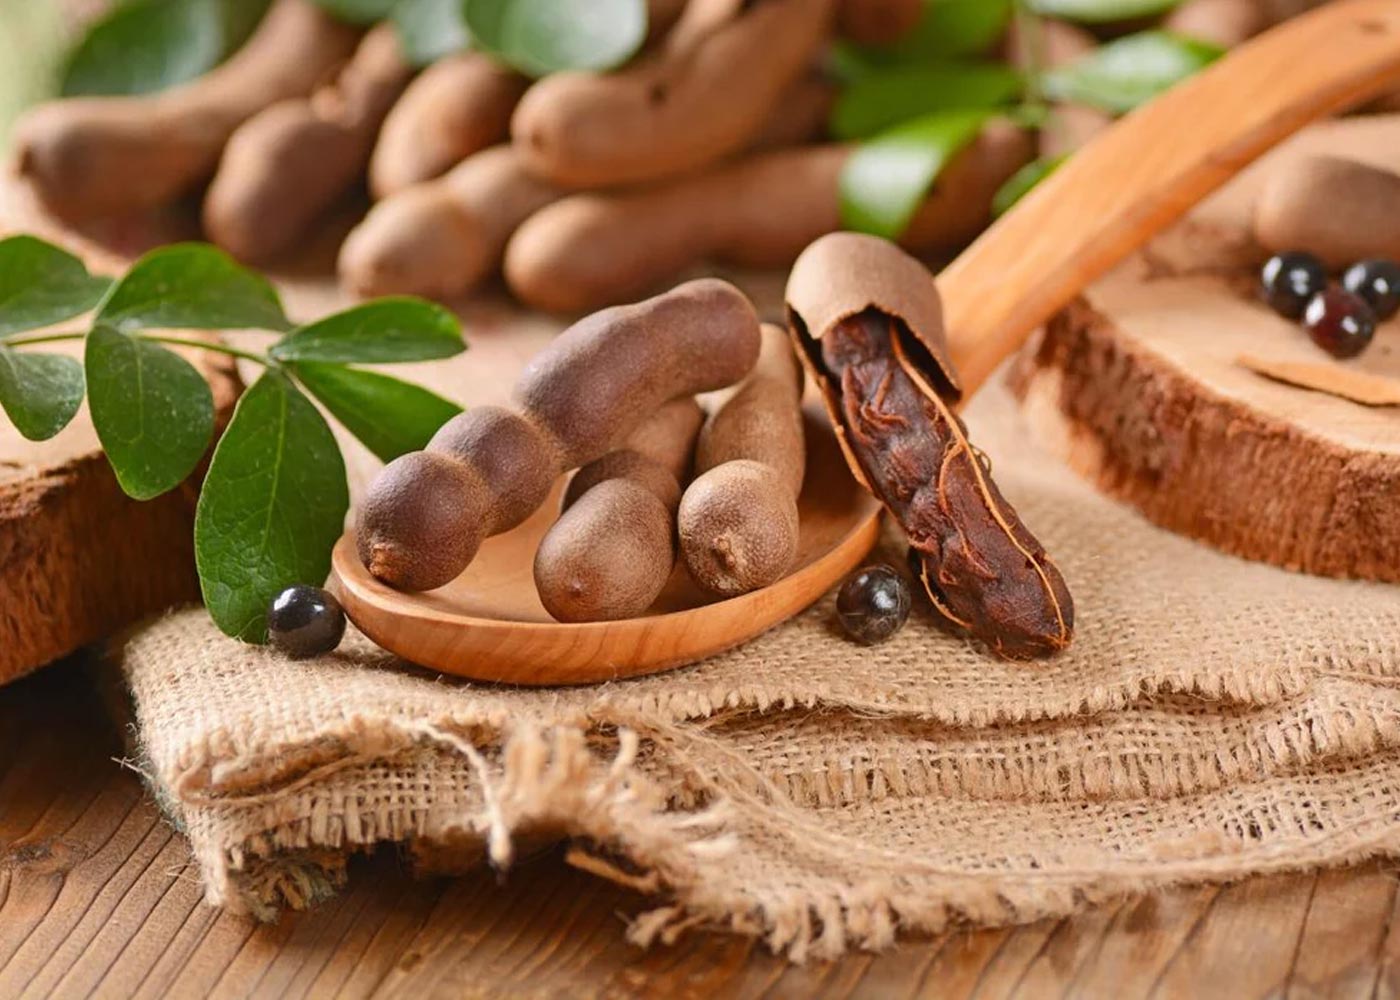 Side Effects of Tamarind for Female